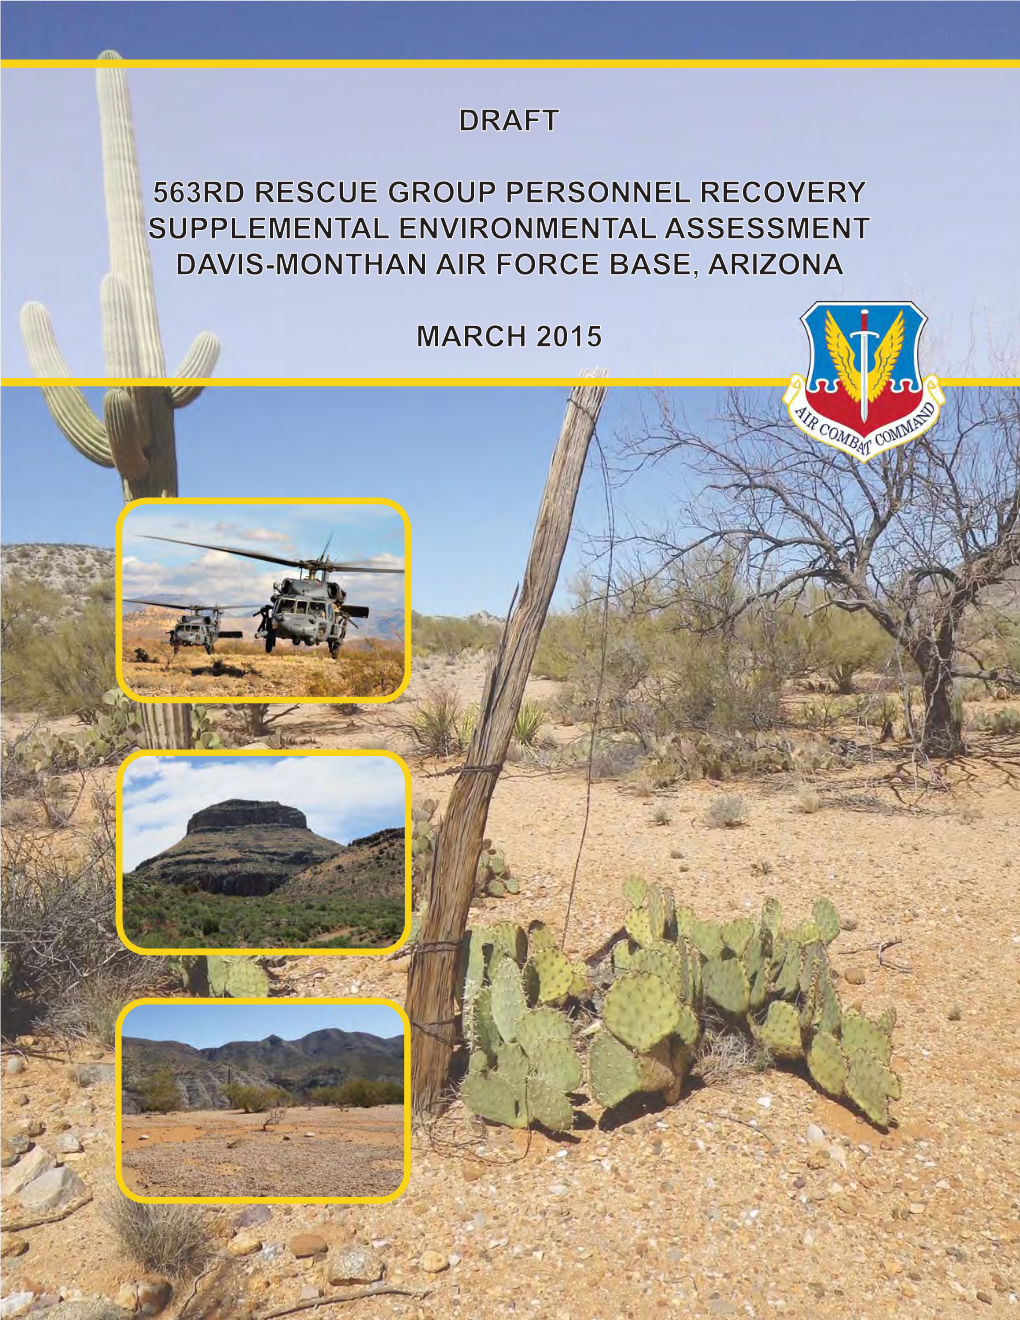 Draft 563Rd Rescue Group Personnel Recovery Supplemental Environmental Assessment Davis-Monthan Air Force Base, Arizona March 2015